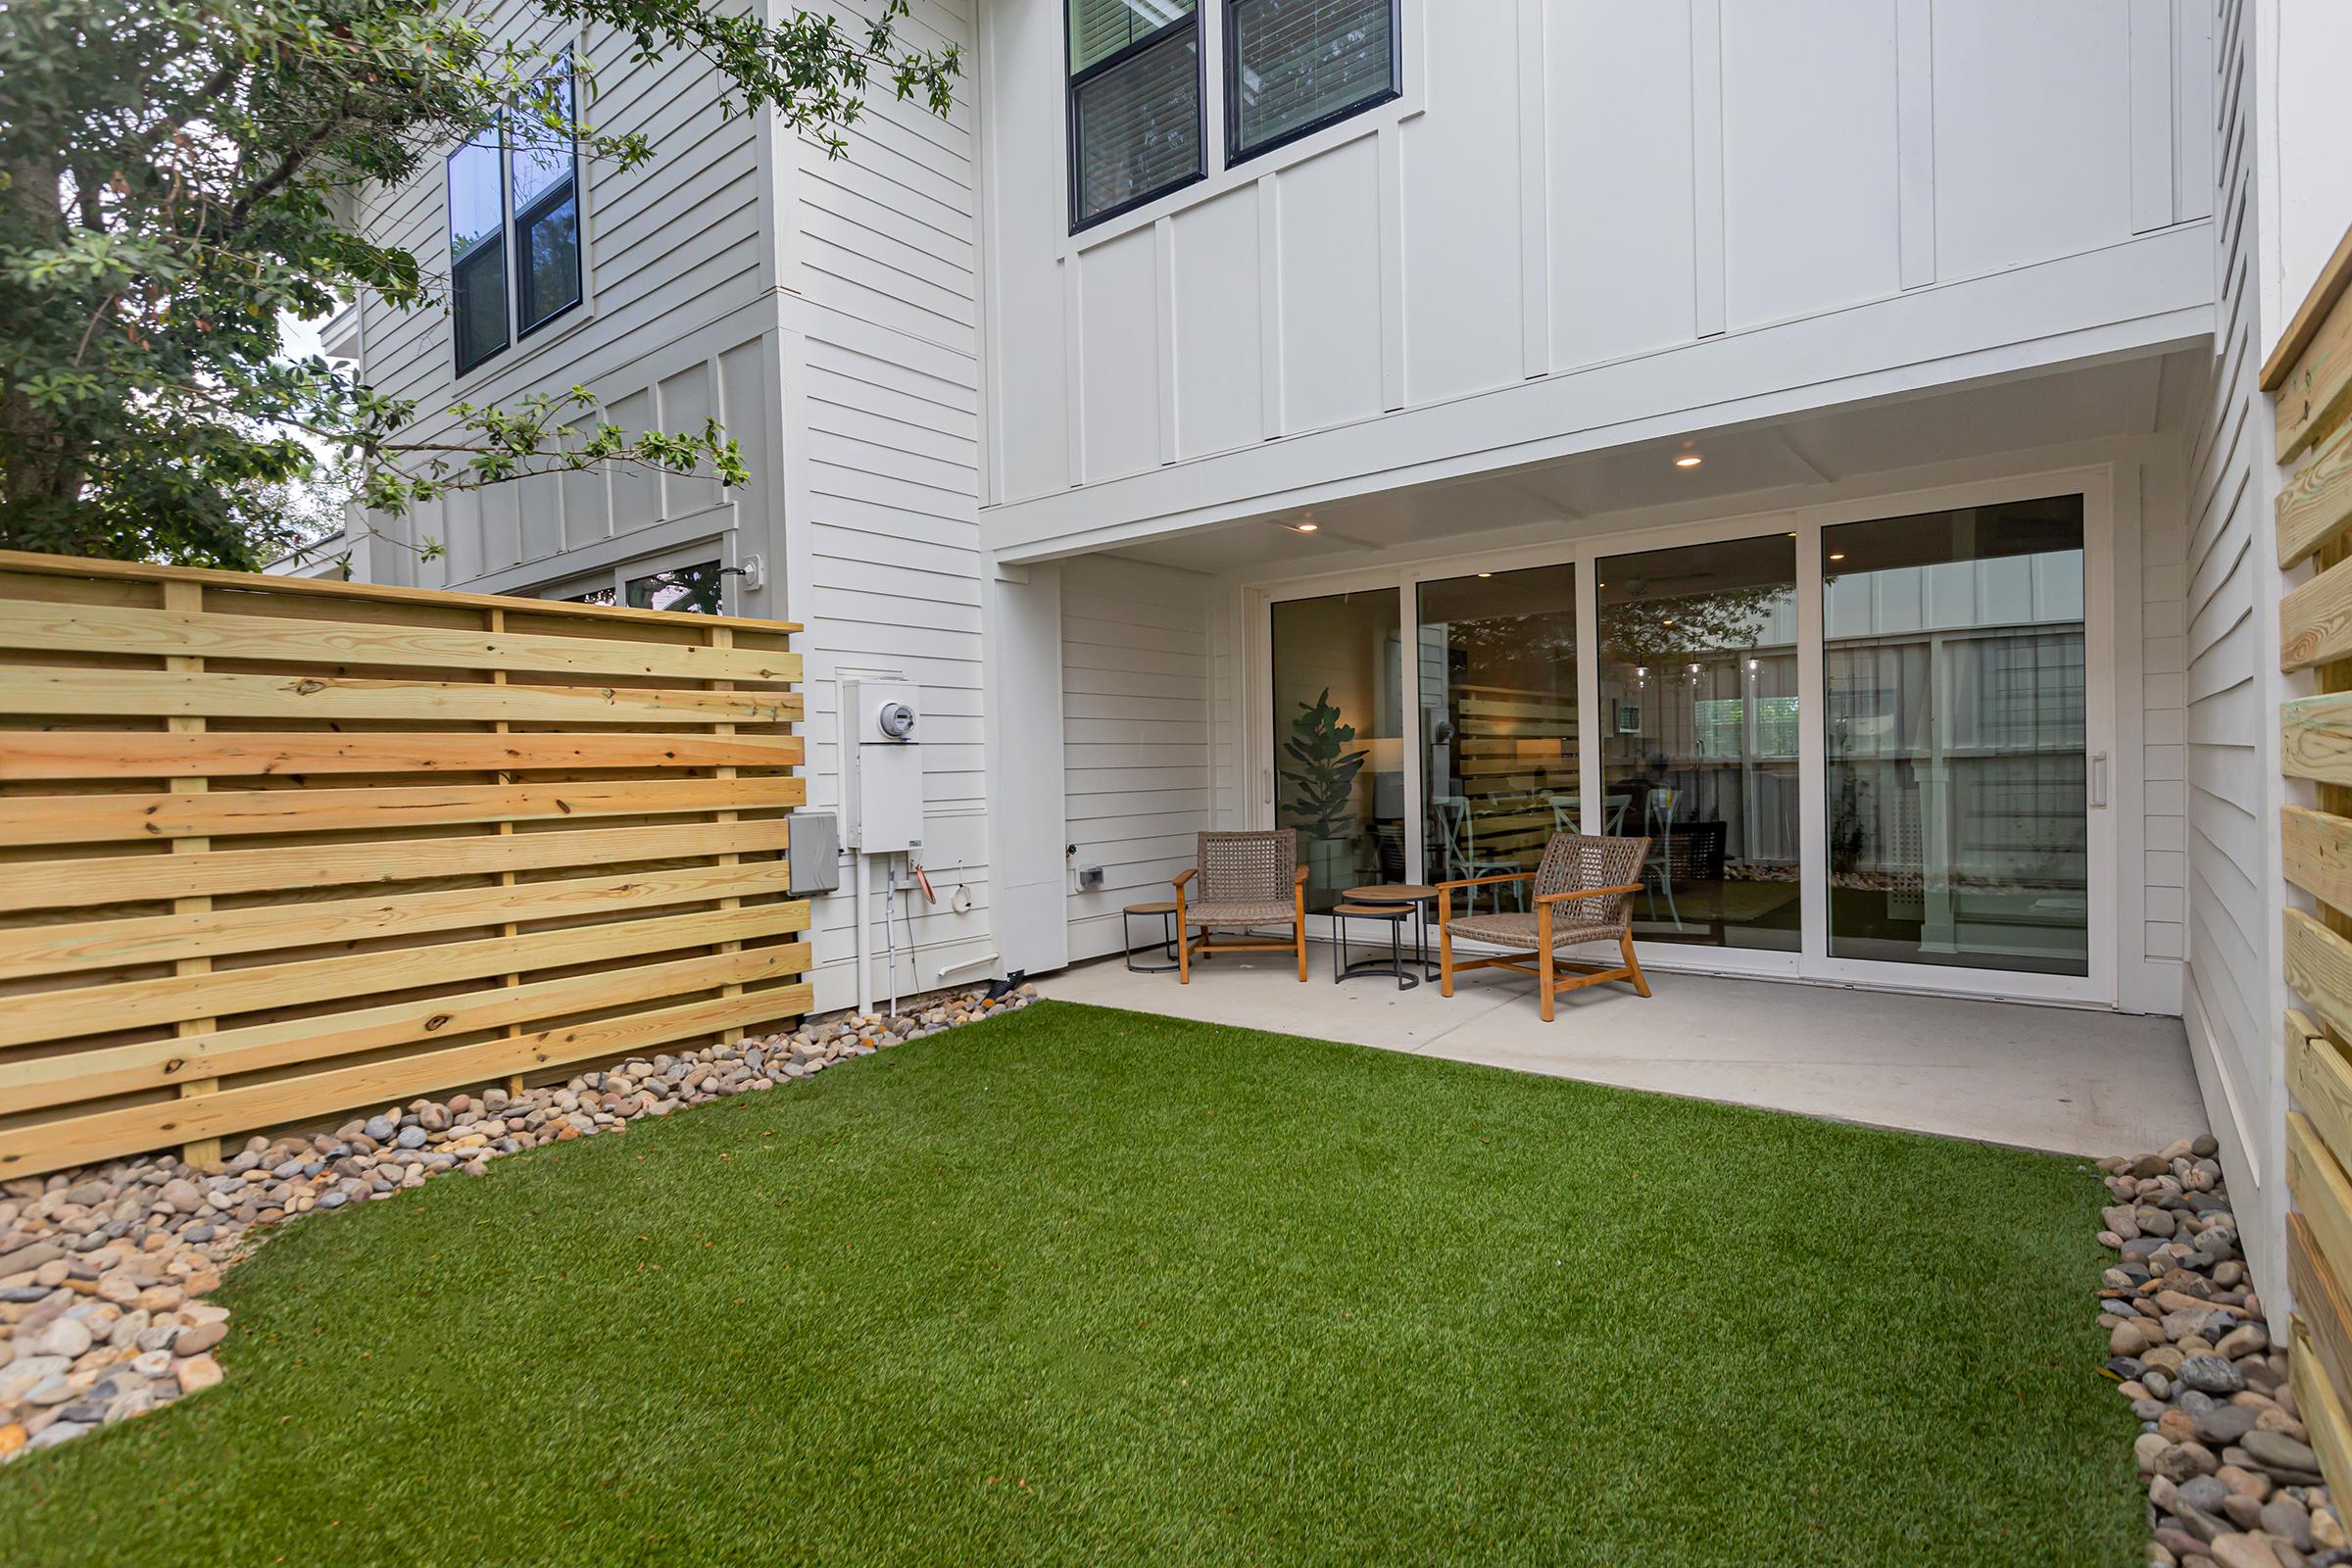 PRIVATE FENCED BACKYARDS